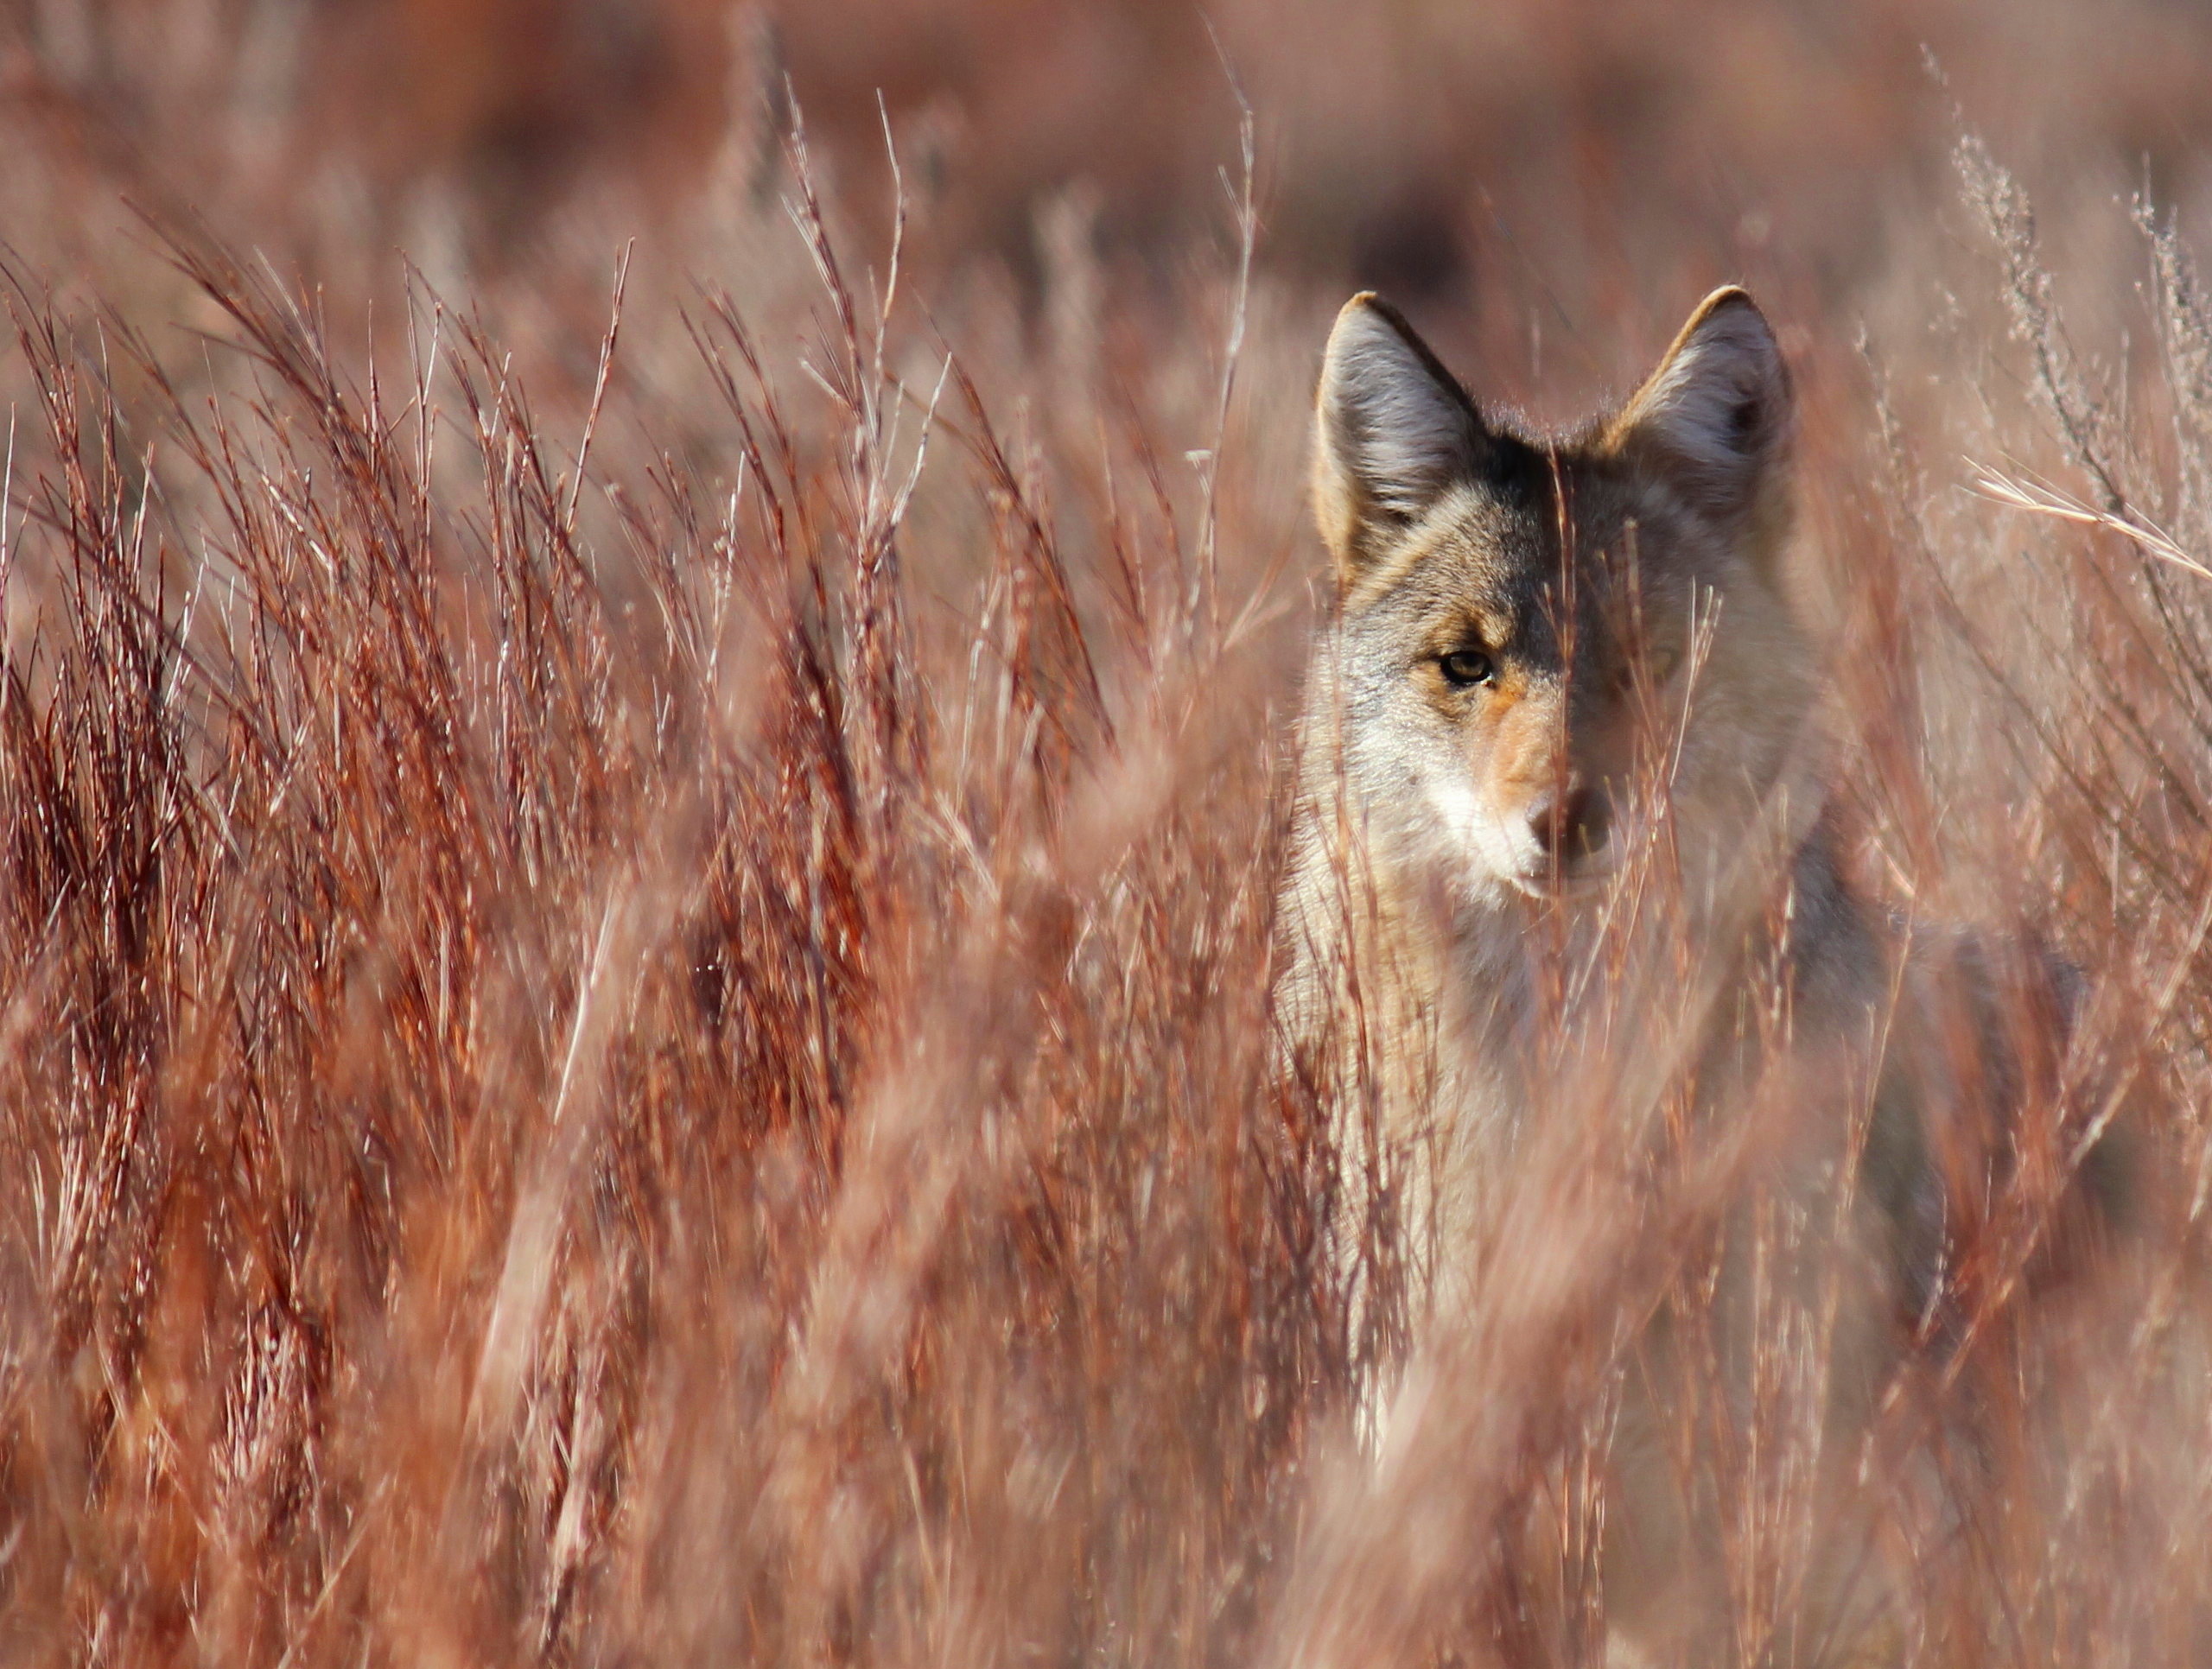 4th Place - Coyote in Little Bluestem in Red Hills (7469132472)